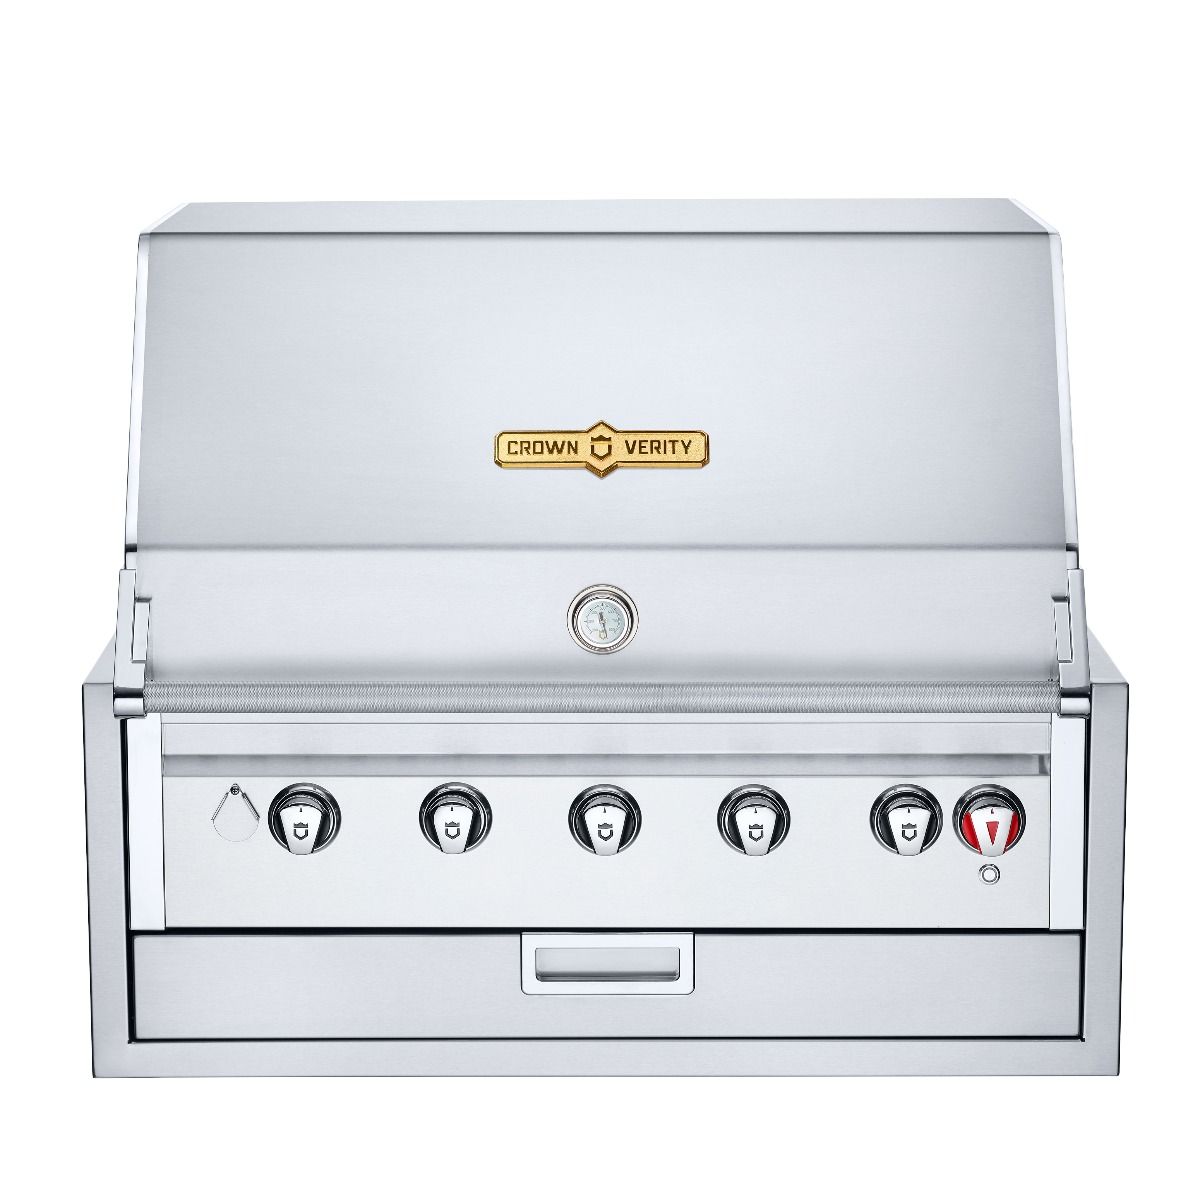 Crown Verity Tailgate BBQ Grill tg-1 Review